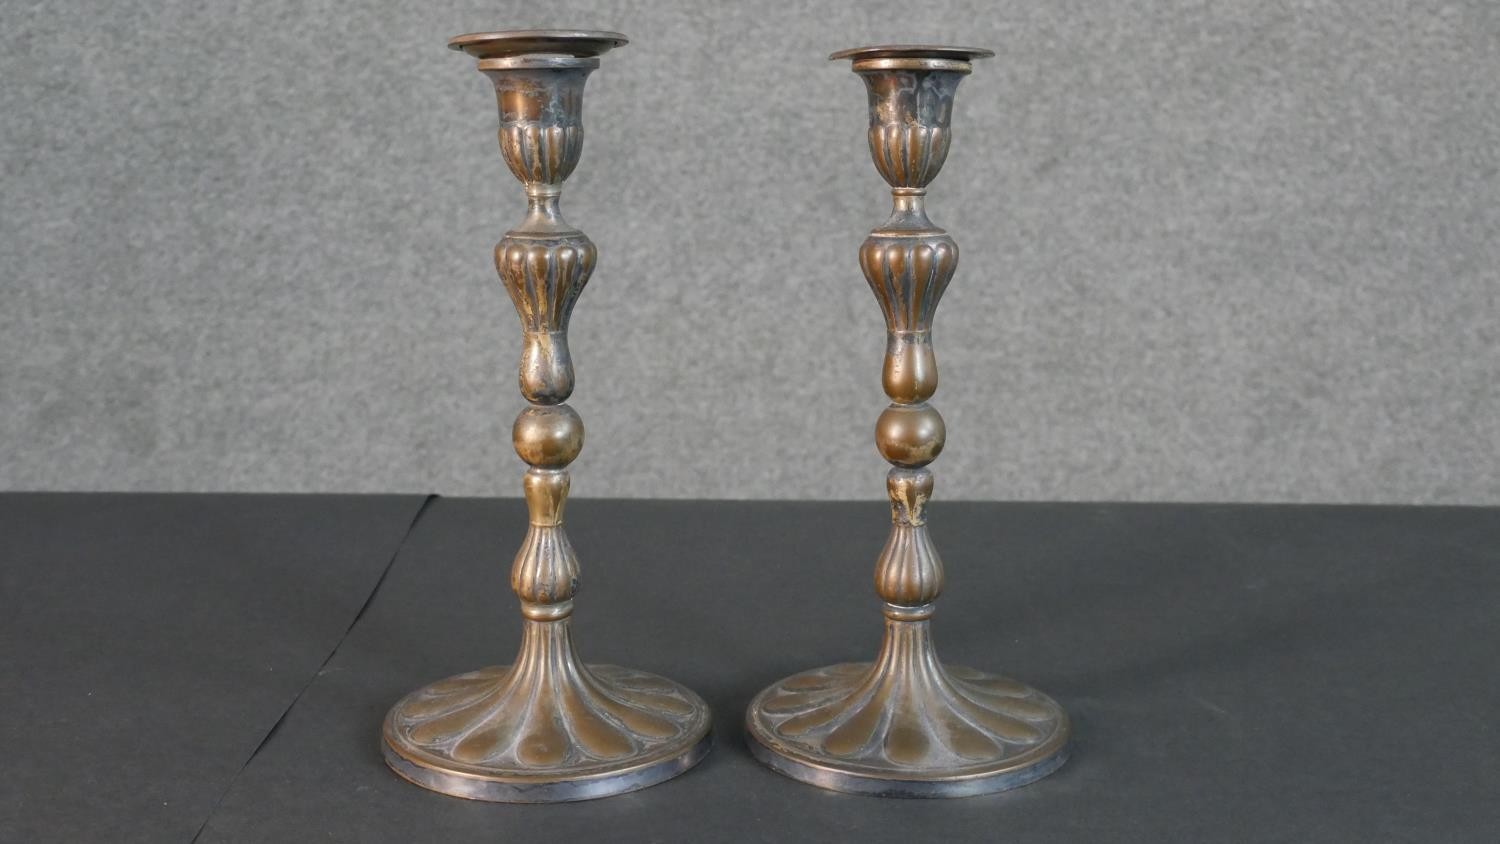 Two pairs of 19th century repousse design candle sticks. H.29 Diam.14cm (largest) - Image 2 of 6